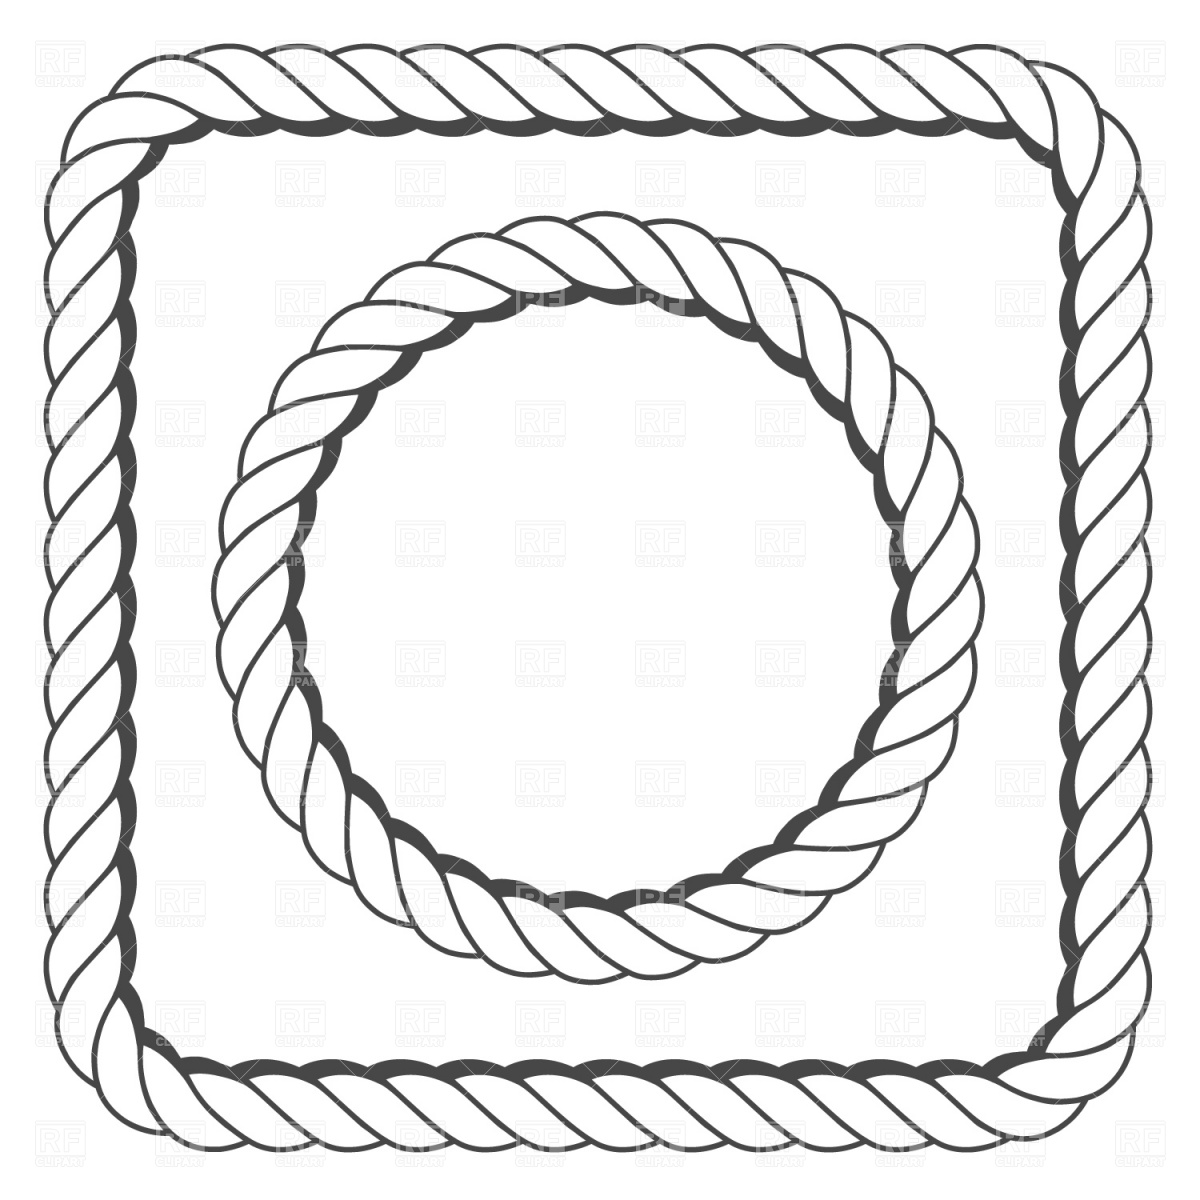 Rope frame, Borders and Frames, download Royalty-free vector clip ...